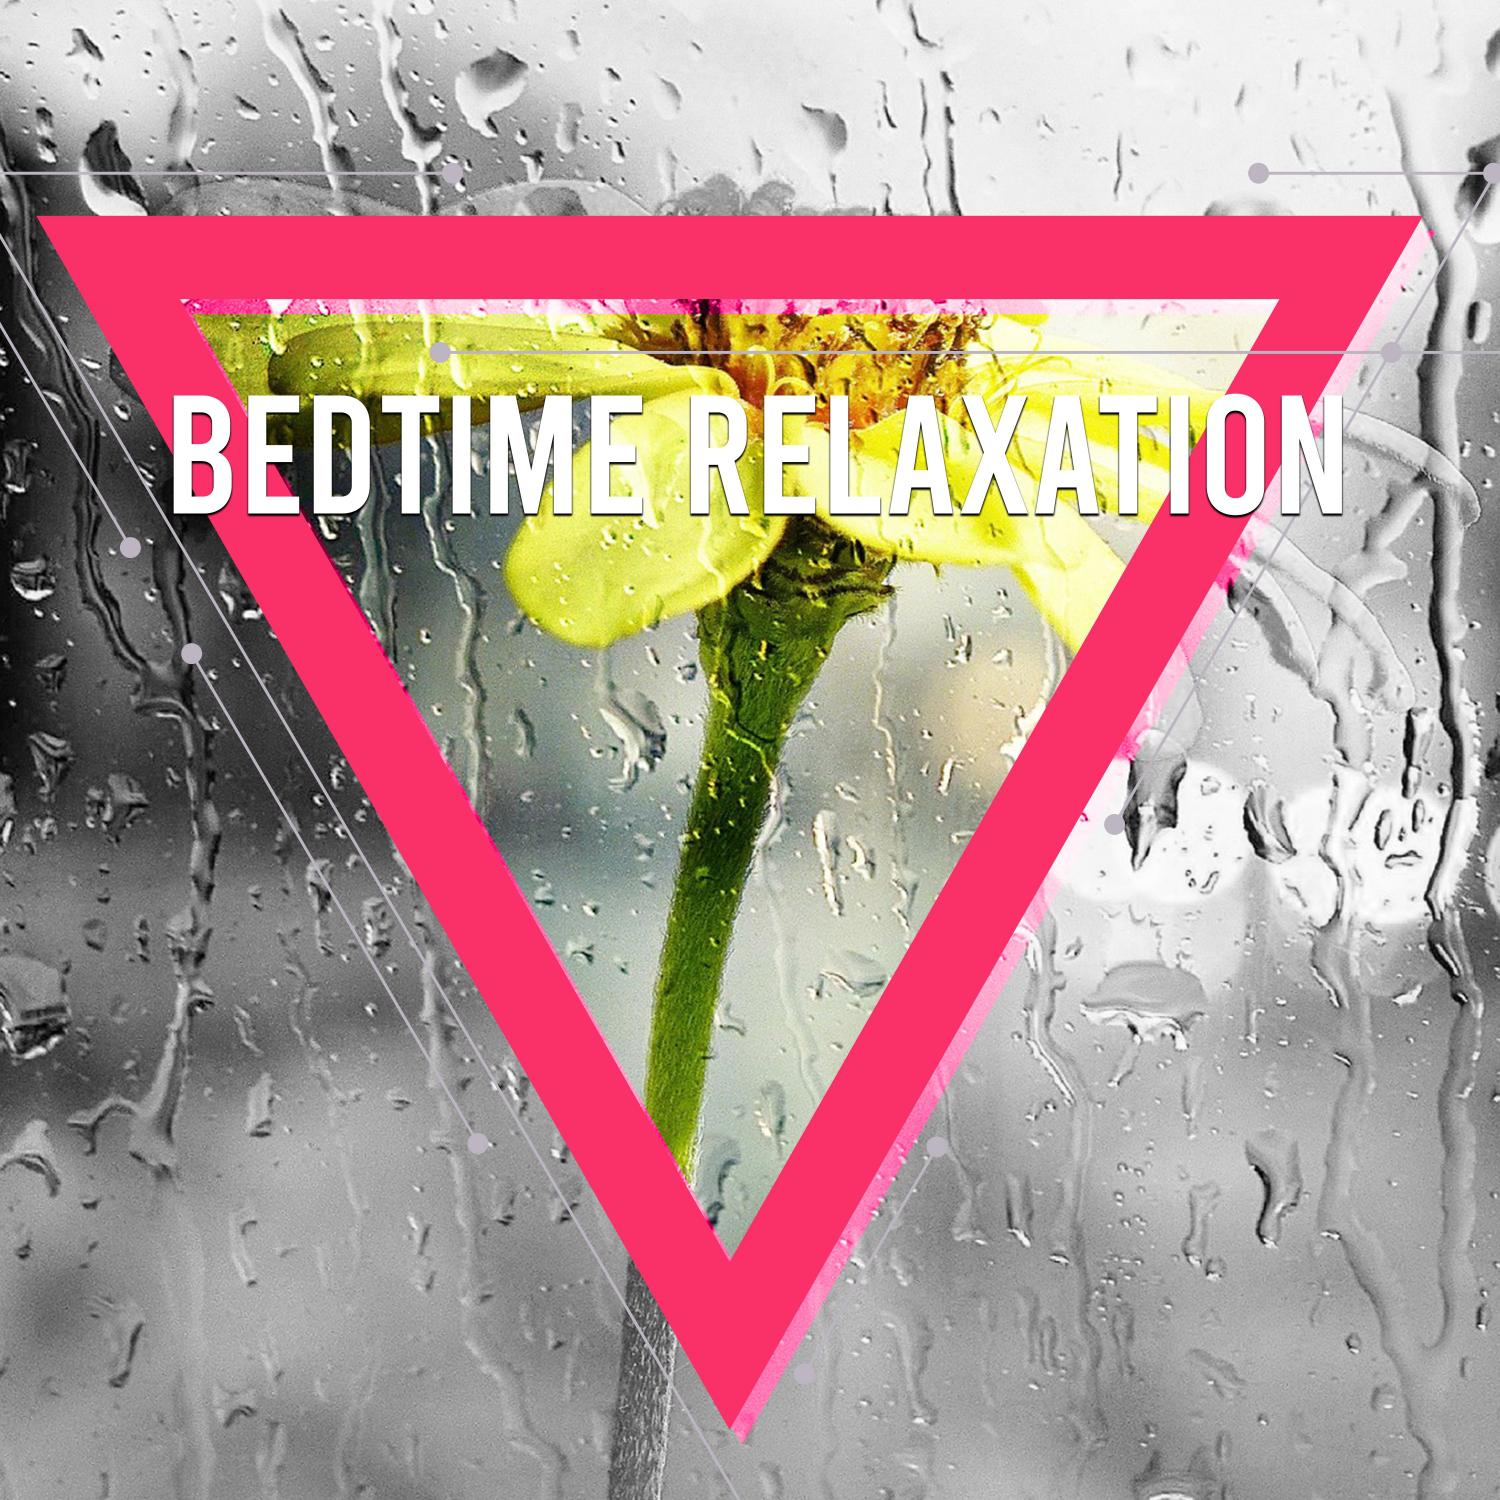 Bedtime Relaxation - Rain Sounds to Help you Sleep. Unwind, Relax and Drift Off Peacefully